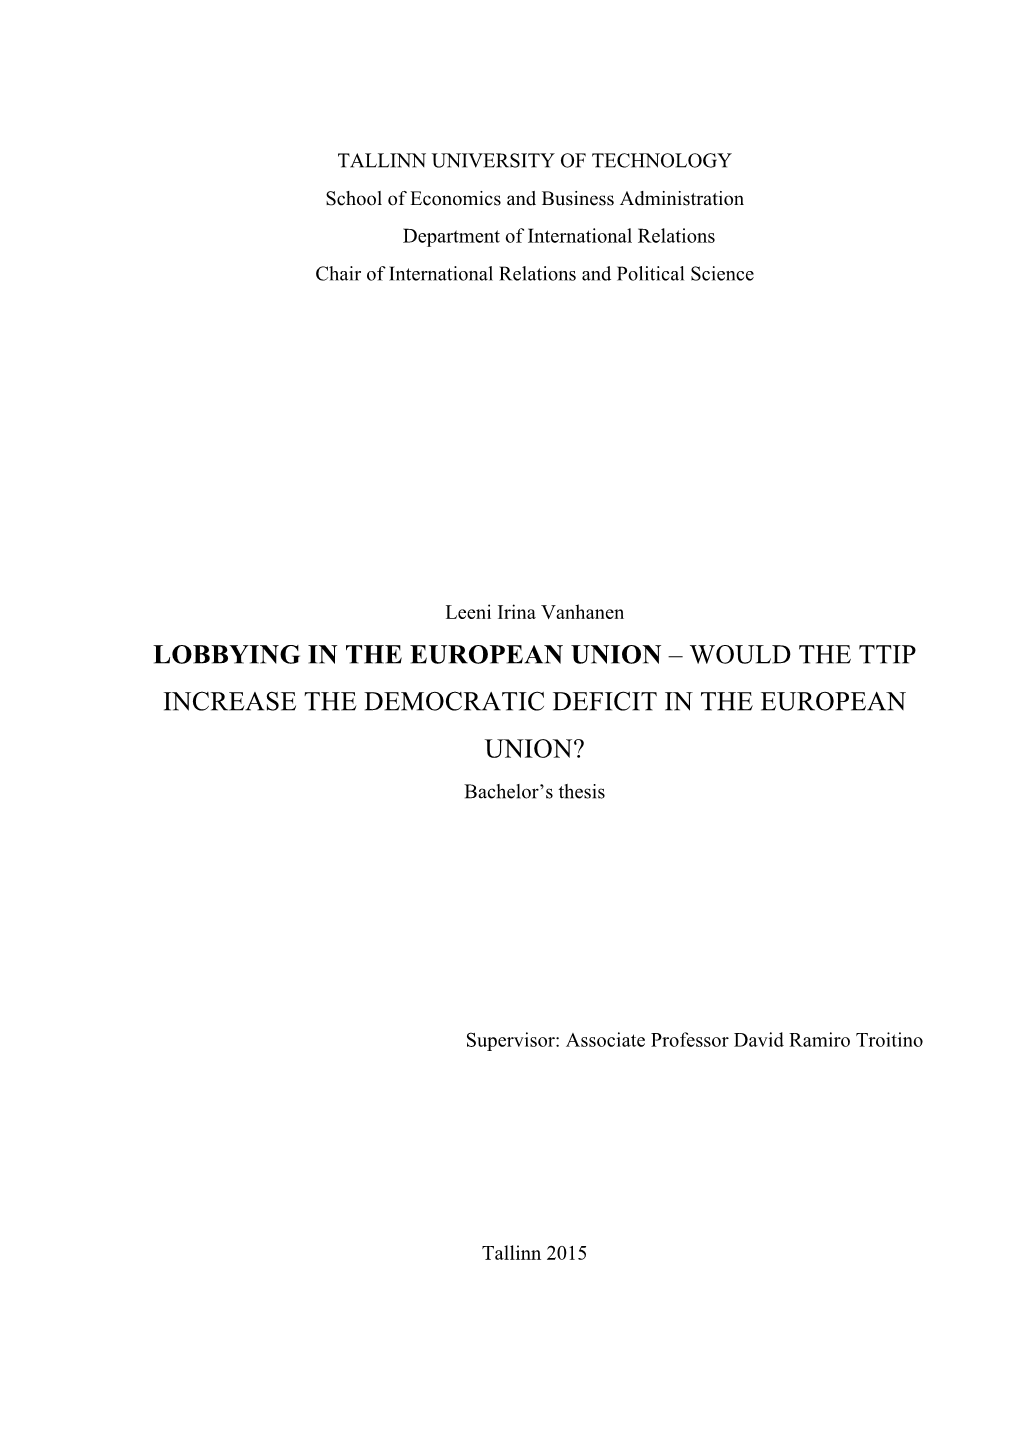 LOBBYING in the EUROPEAN UNION – WOULD the TTIP INCREASE the DEMOCRATIC DEFICIT in the EUROPEAN UNION? Bachelor’S Thesis